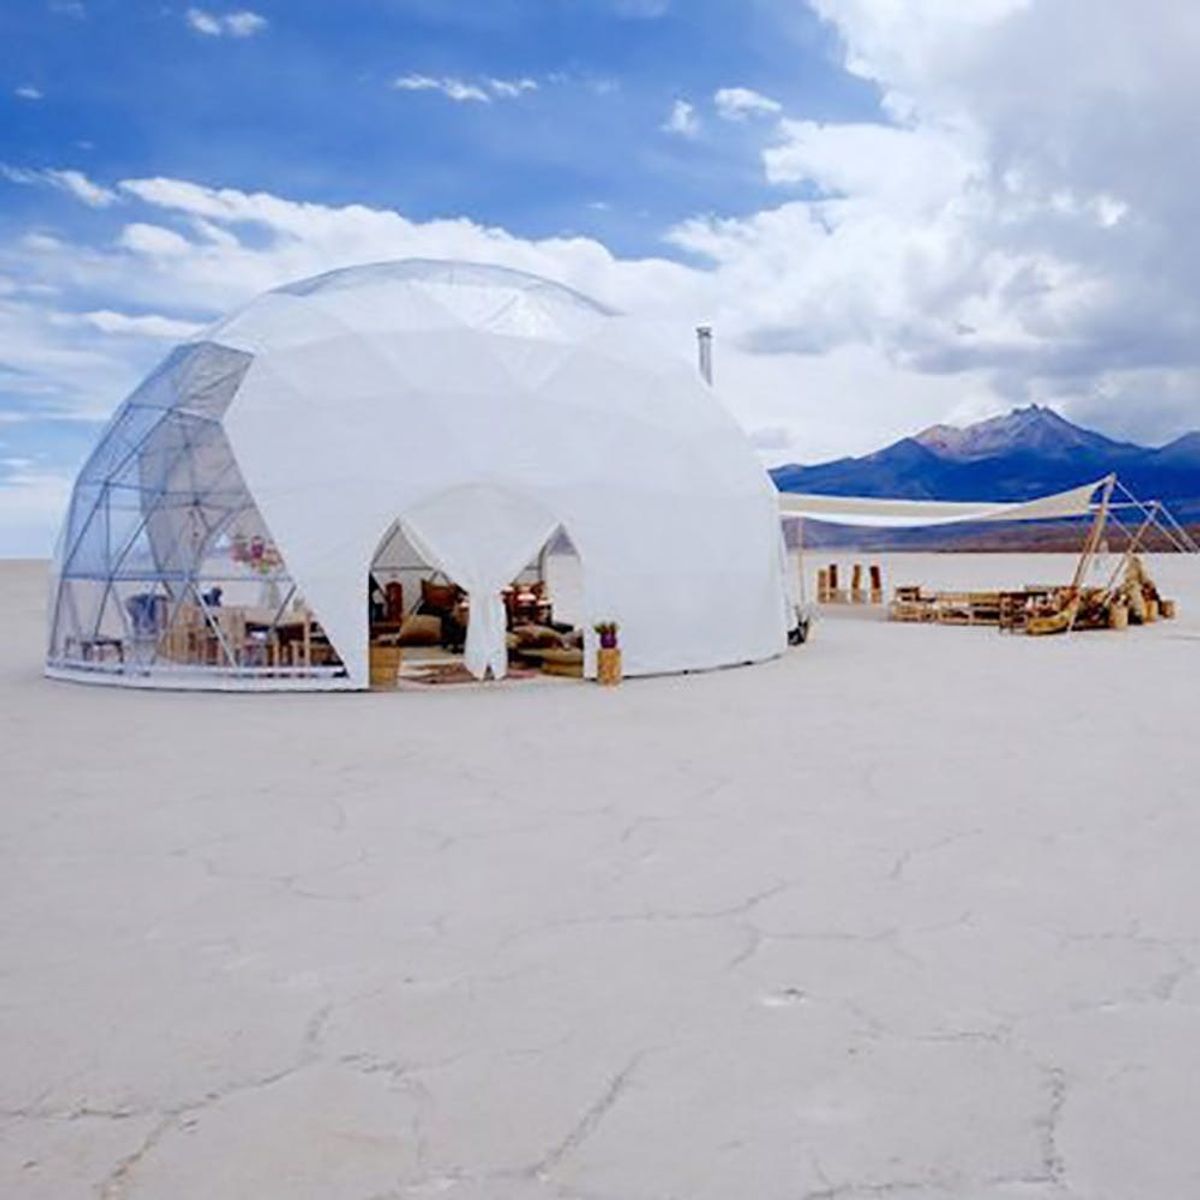 This Company Will Create a Custom Pop-Up Hotel for You Anywhere in the World